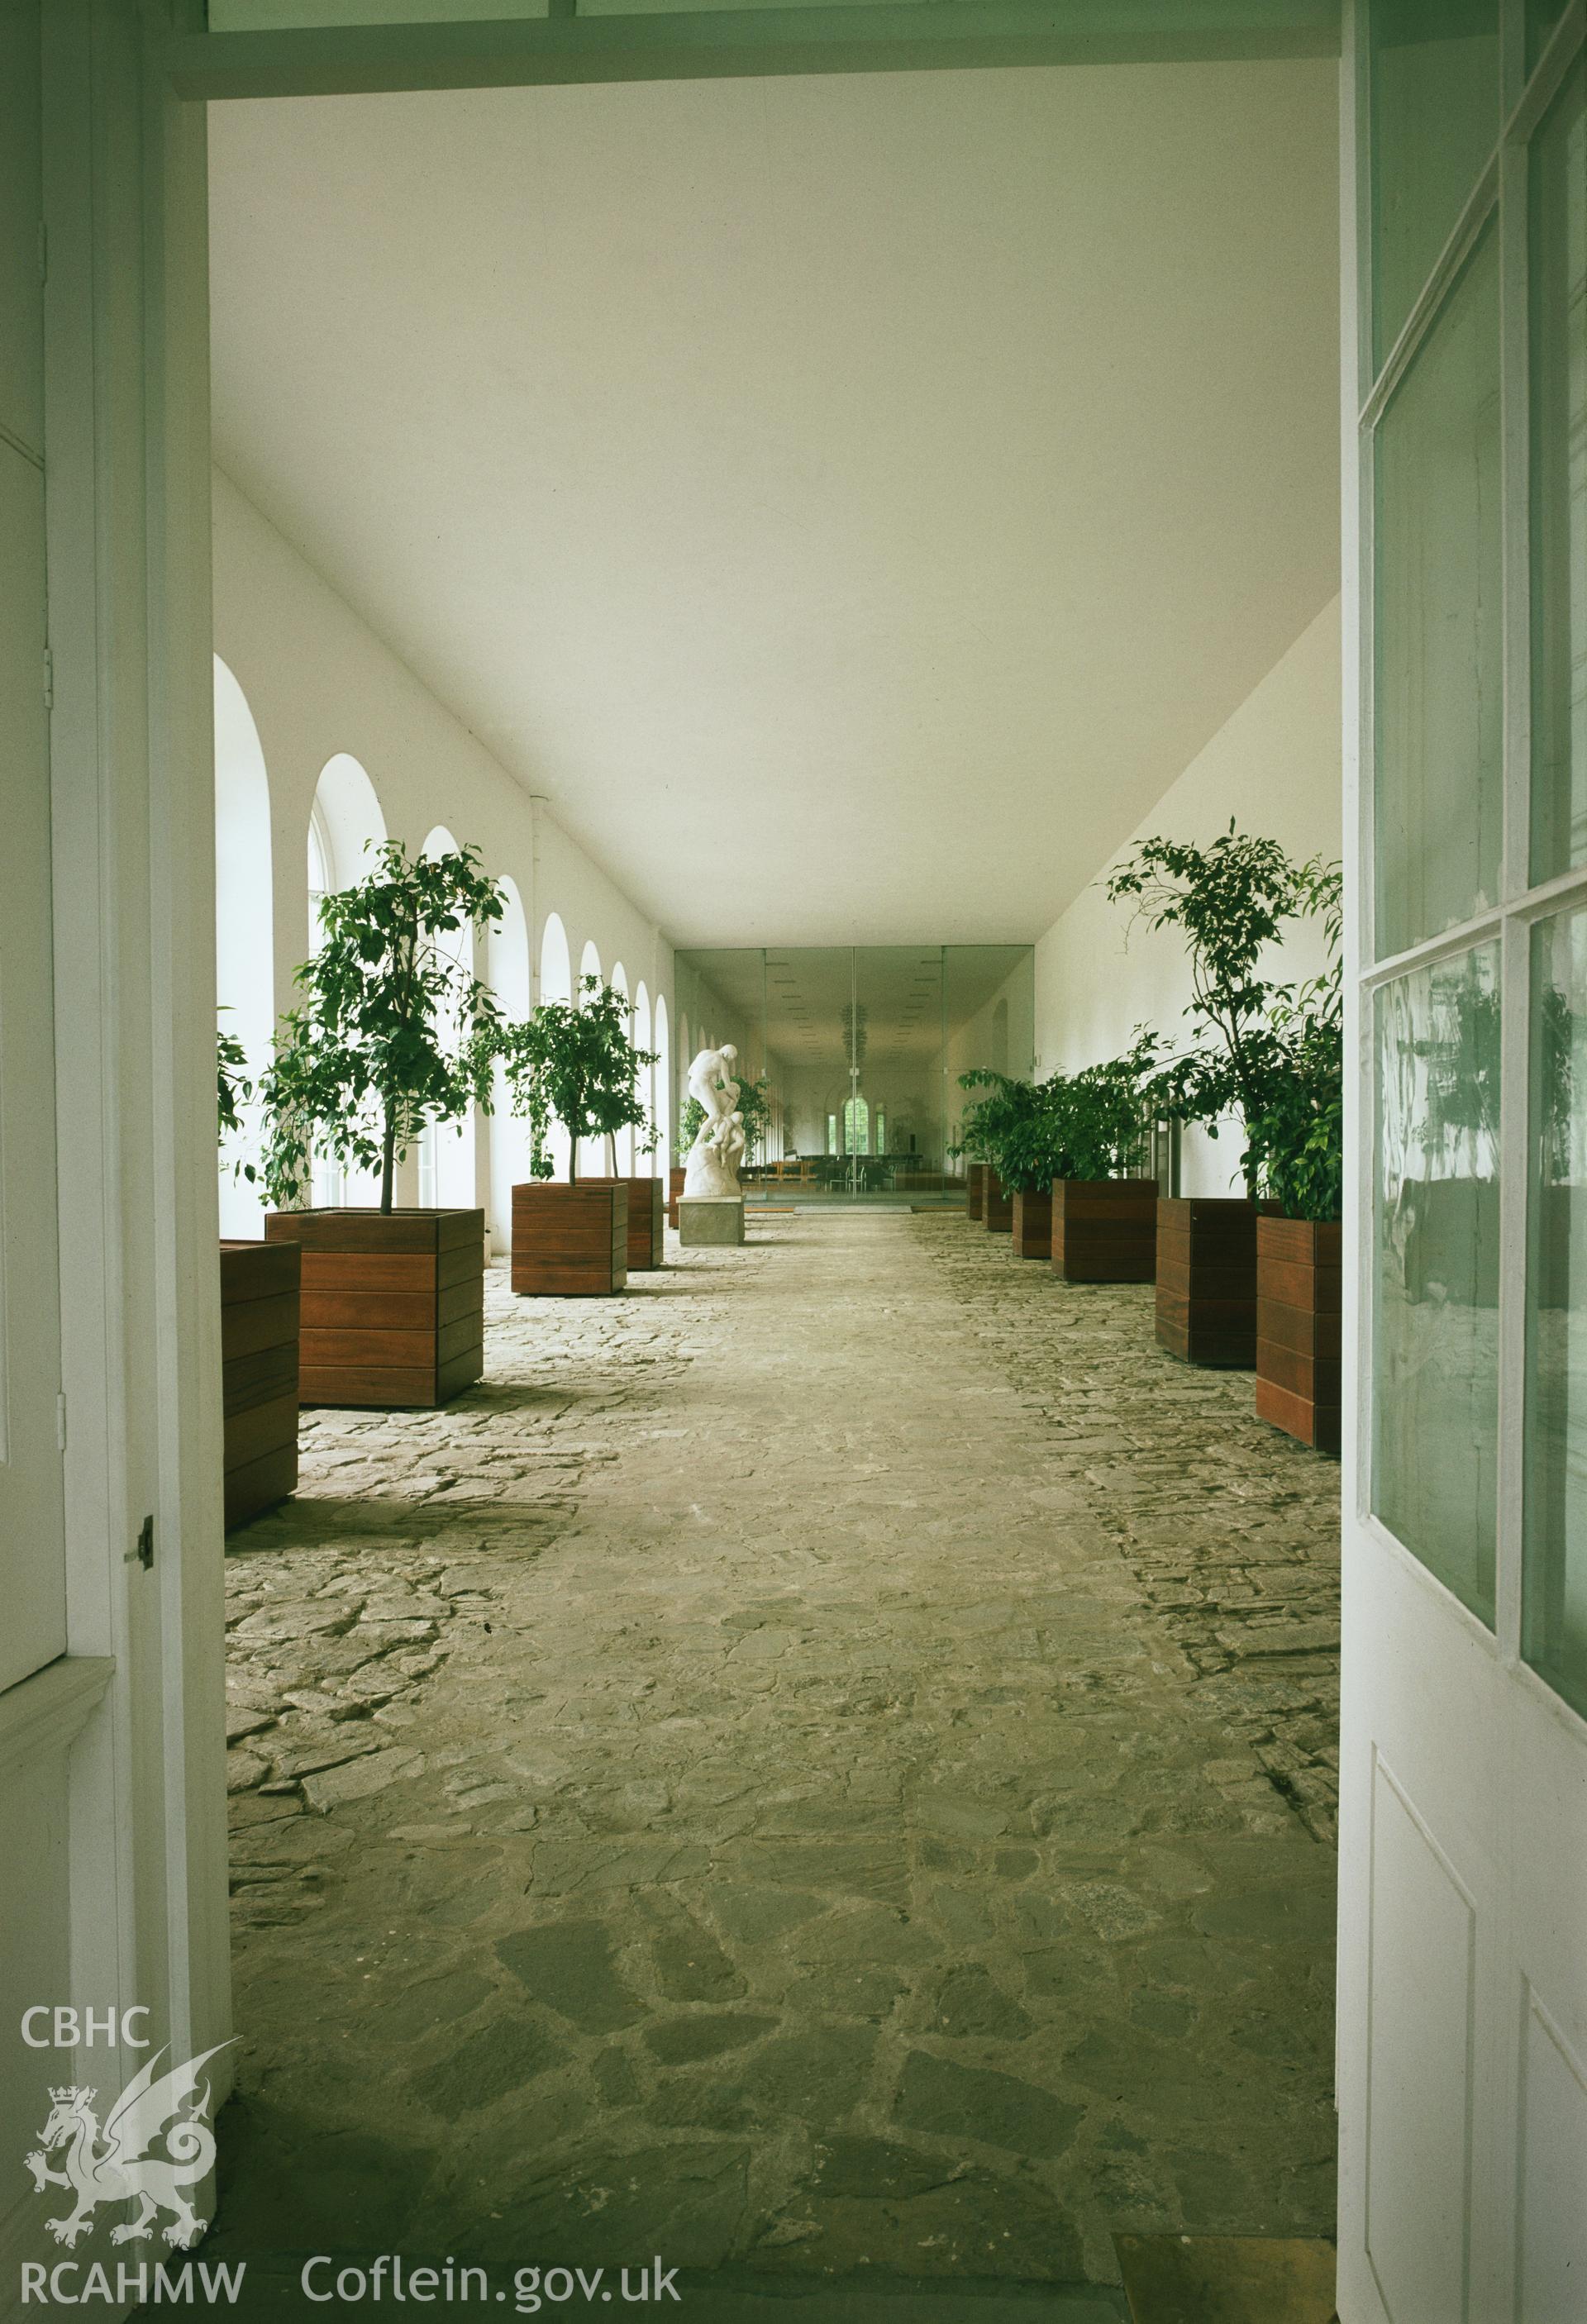 RCAHMW colour transparency showing an interior view of Margam Orangery, taken by Iain Wright, 1979